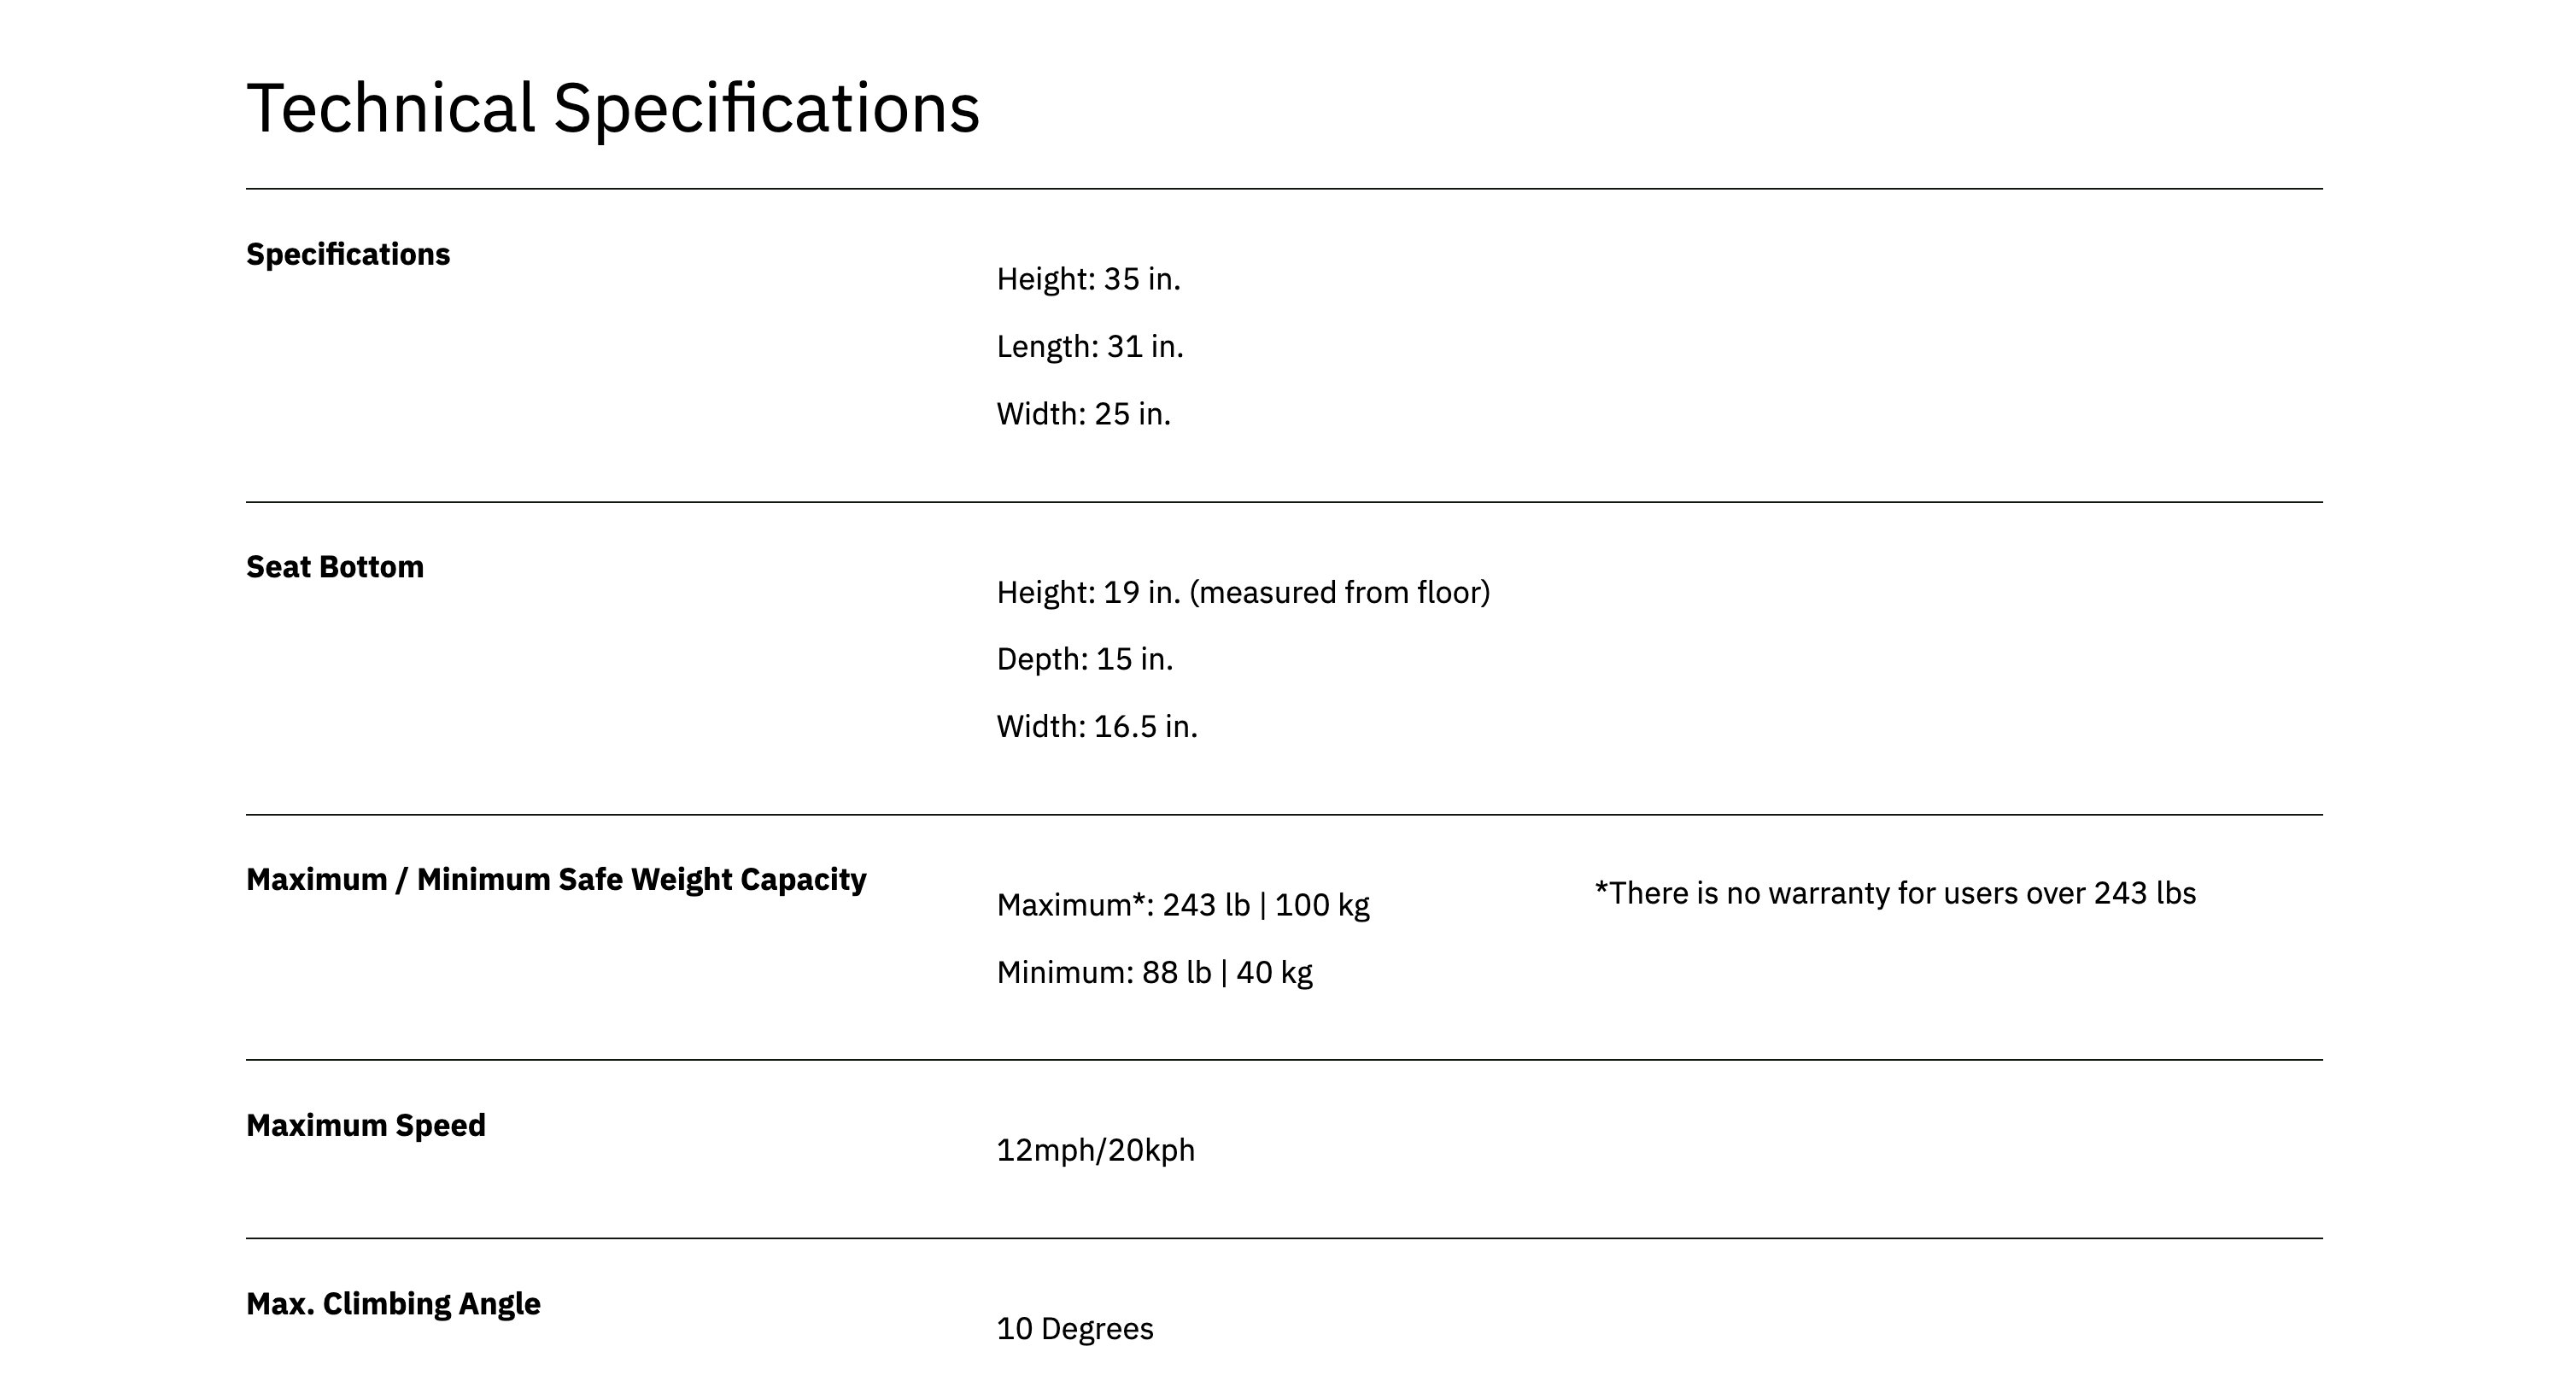 A screenshot of the myomeo.com website showing the technical specifications of the product.